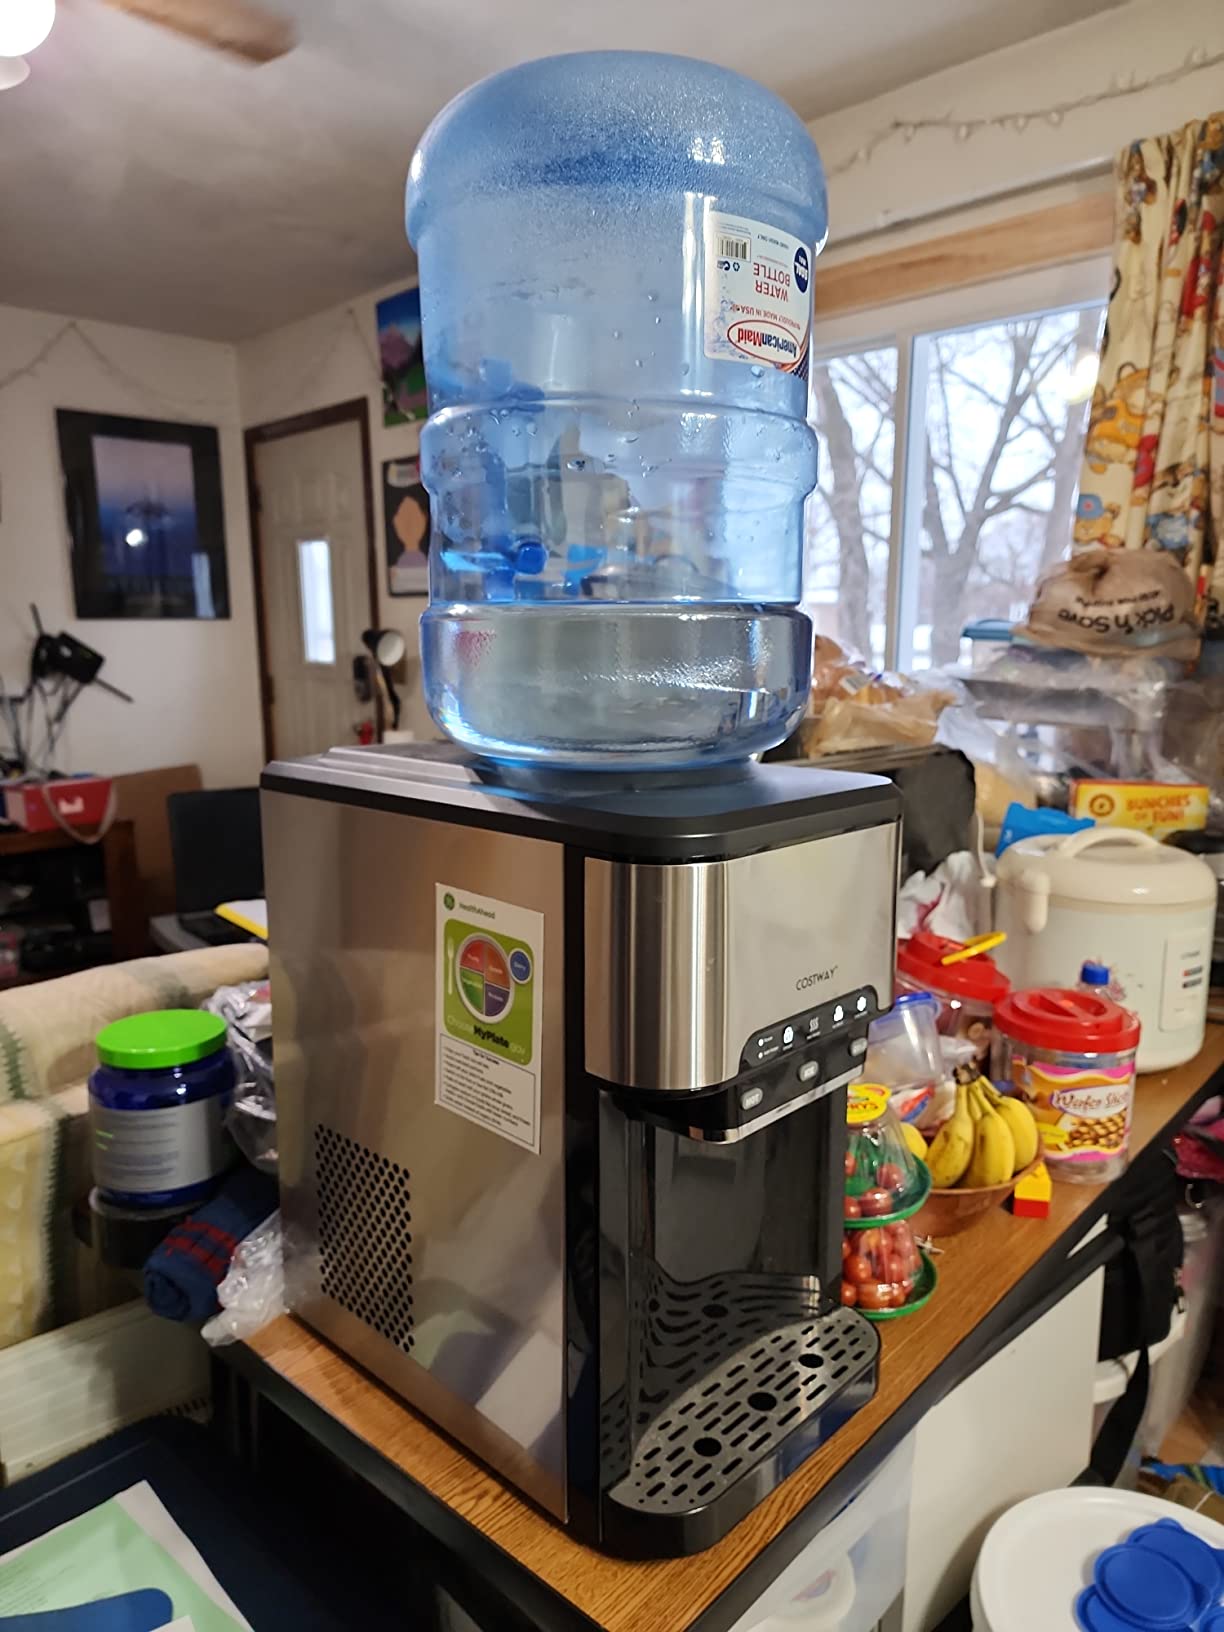 Ice maker doesn't make ice after 6 months.